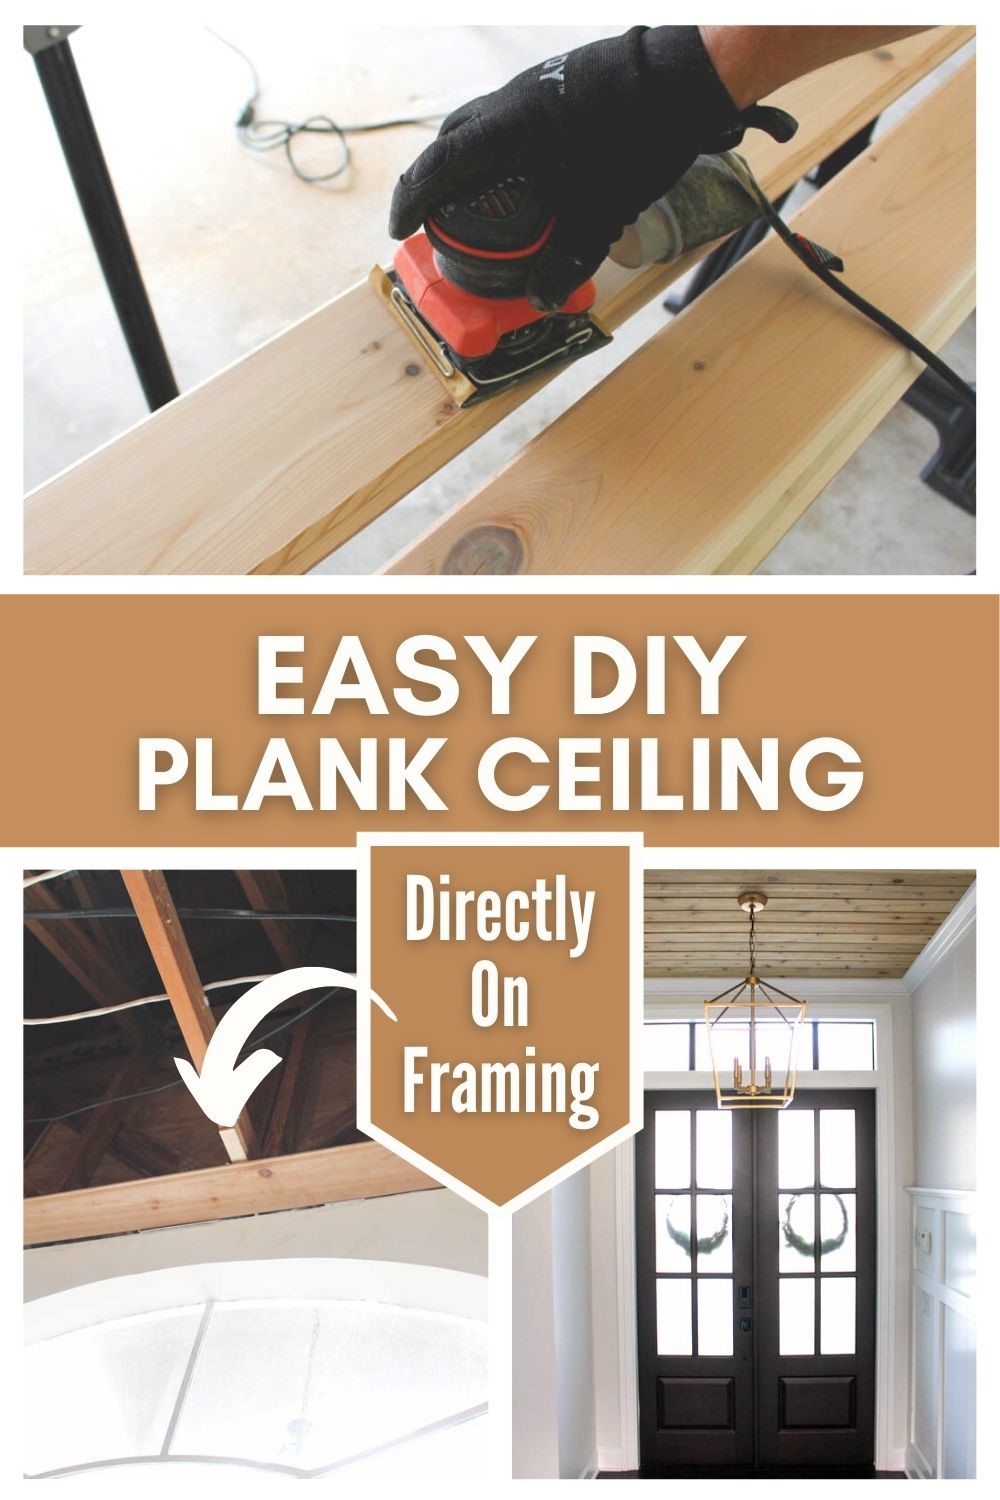 EASY DIY PLANK CEILING DIRECTLY ON FRAMING